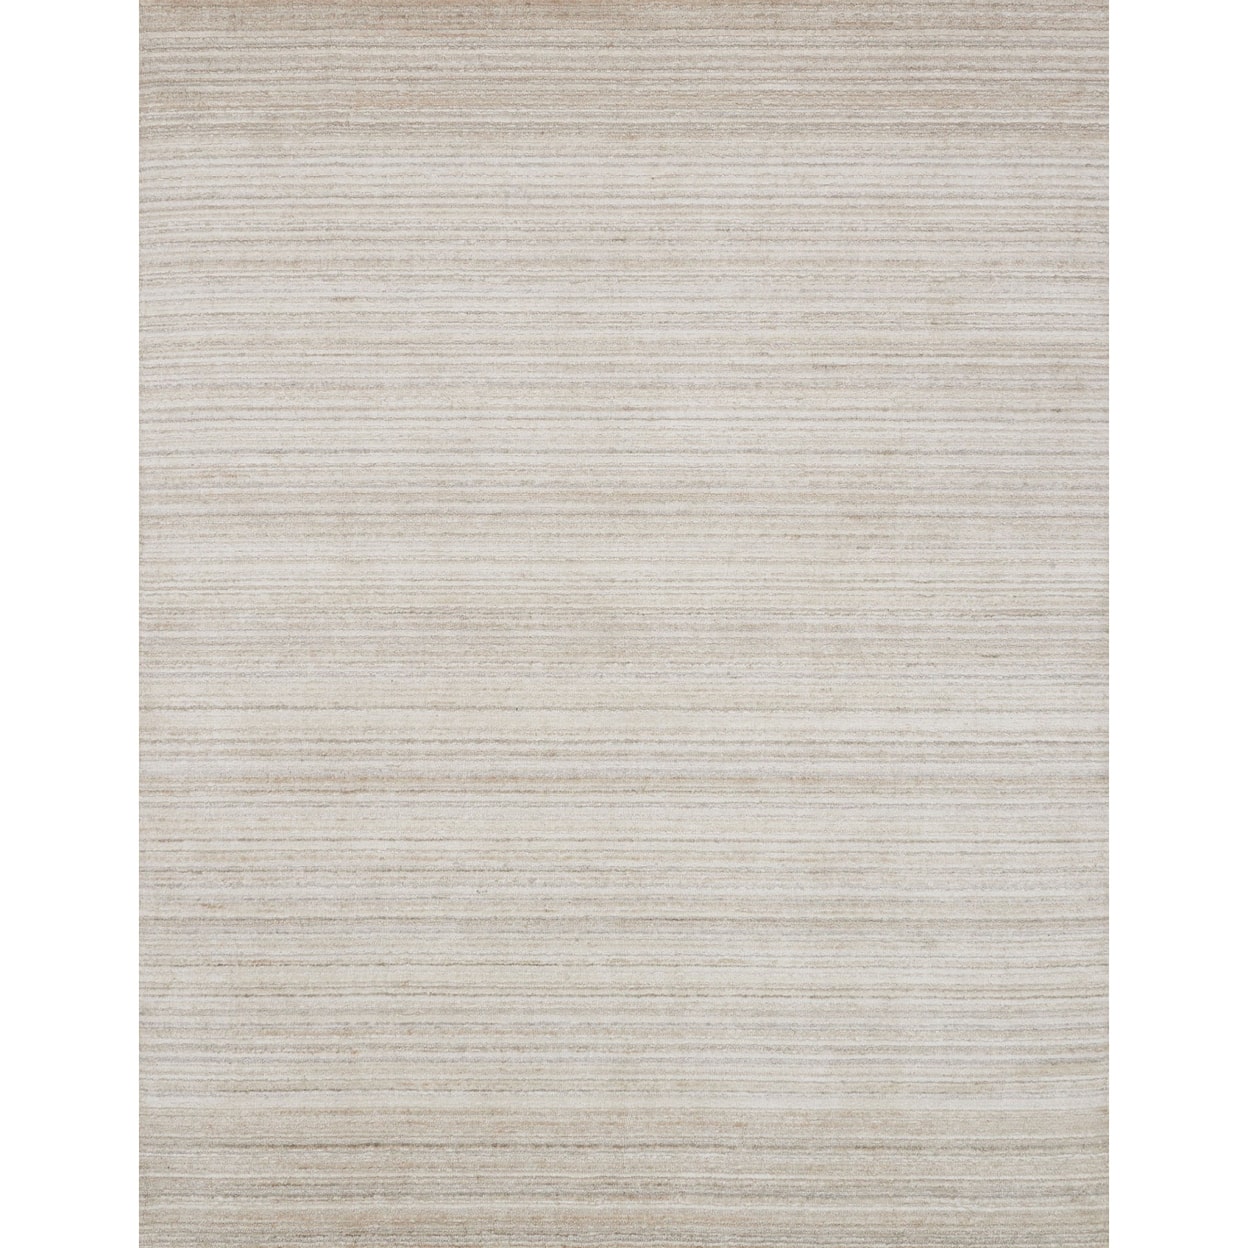 Reeds Rugs Haven 12'-0" x 15'-0" Area Rug